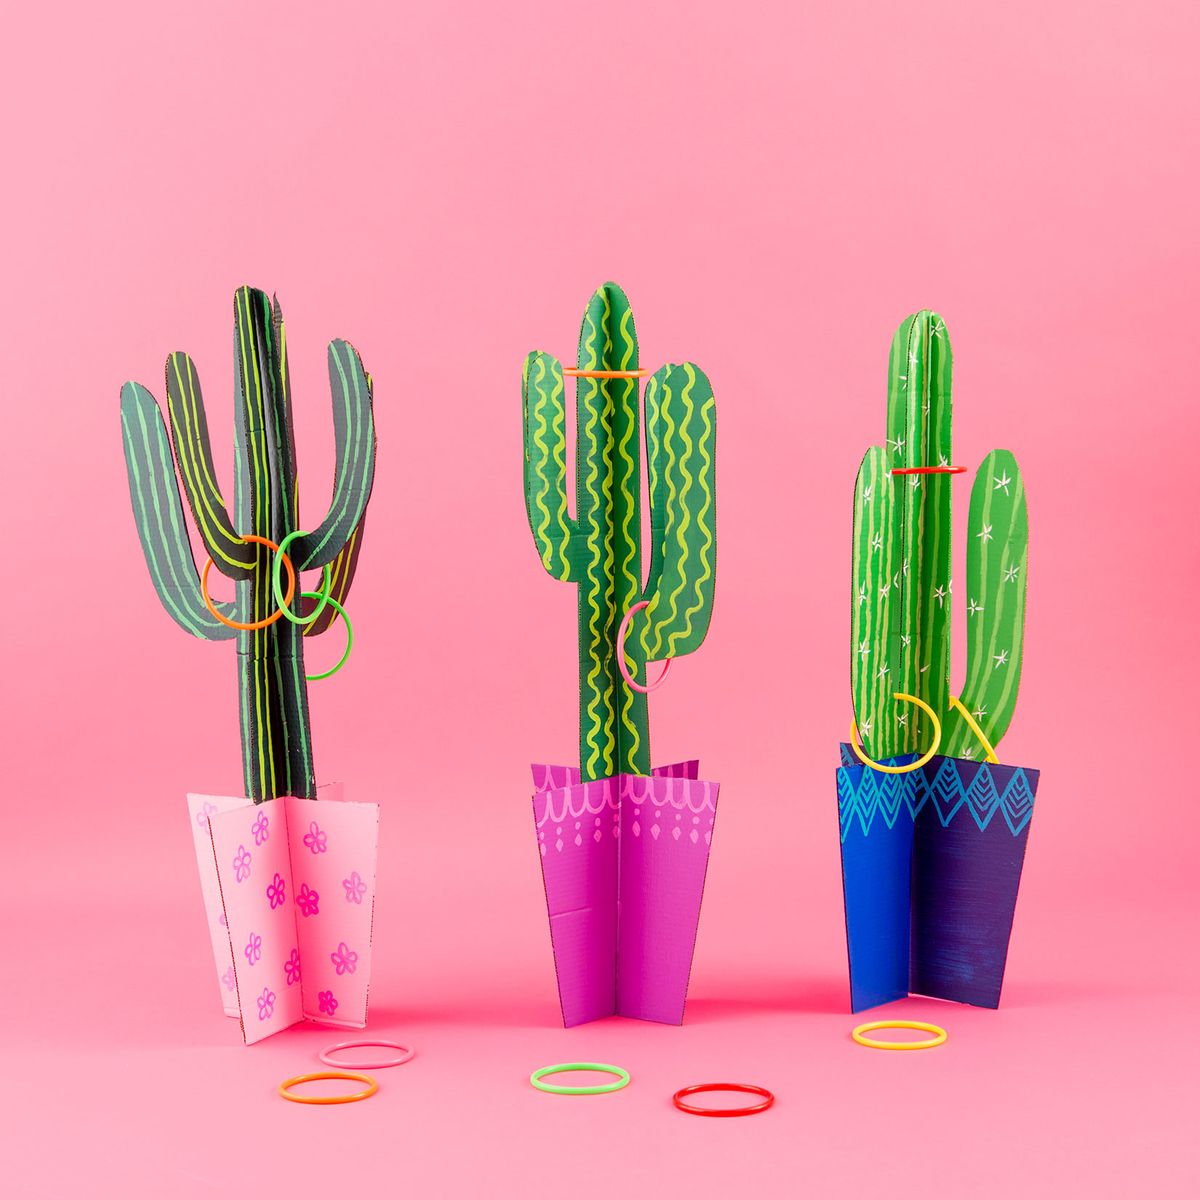 Cactus Ring Toss is the Lawn Game You Need RN